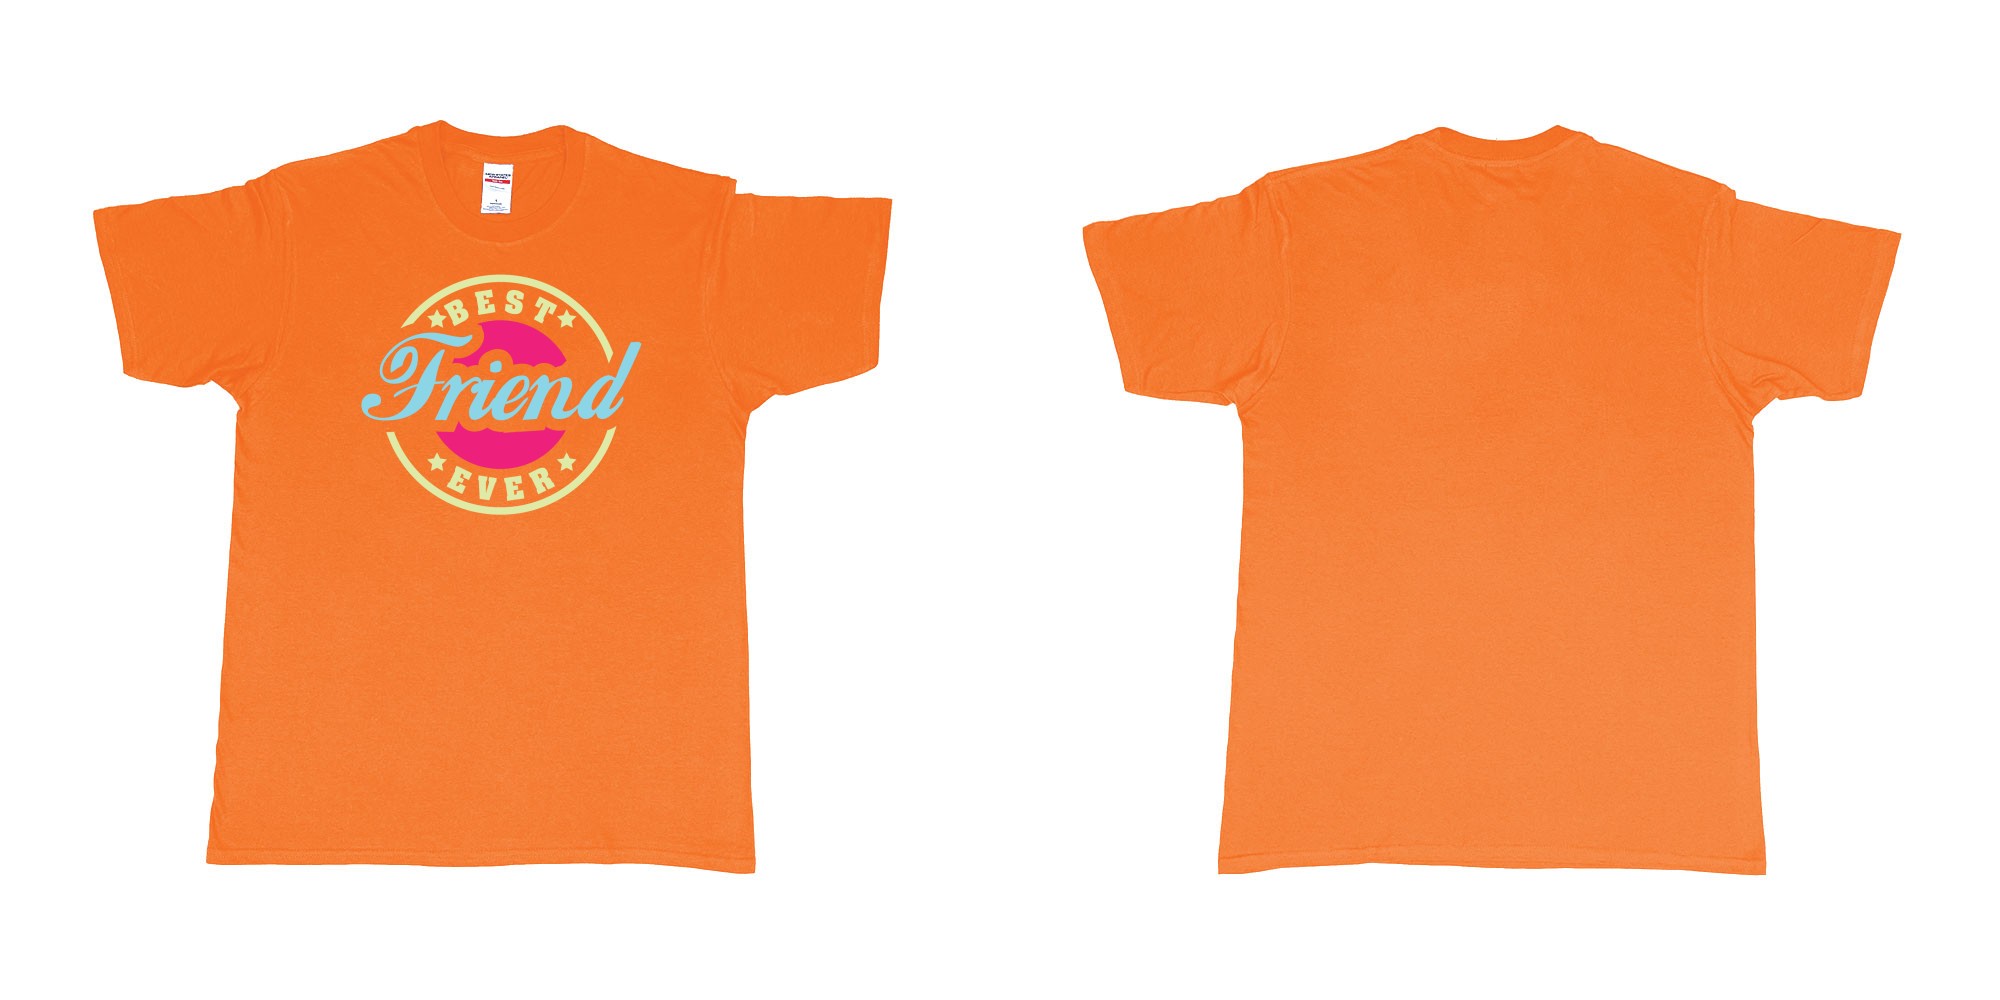 Custom tshirt design best friend ever in fabric color orange choice your own text made in Bali by The Pirate Way